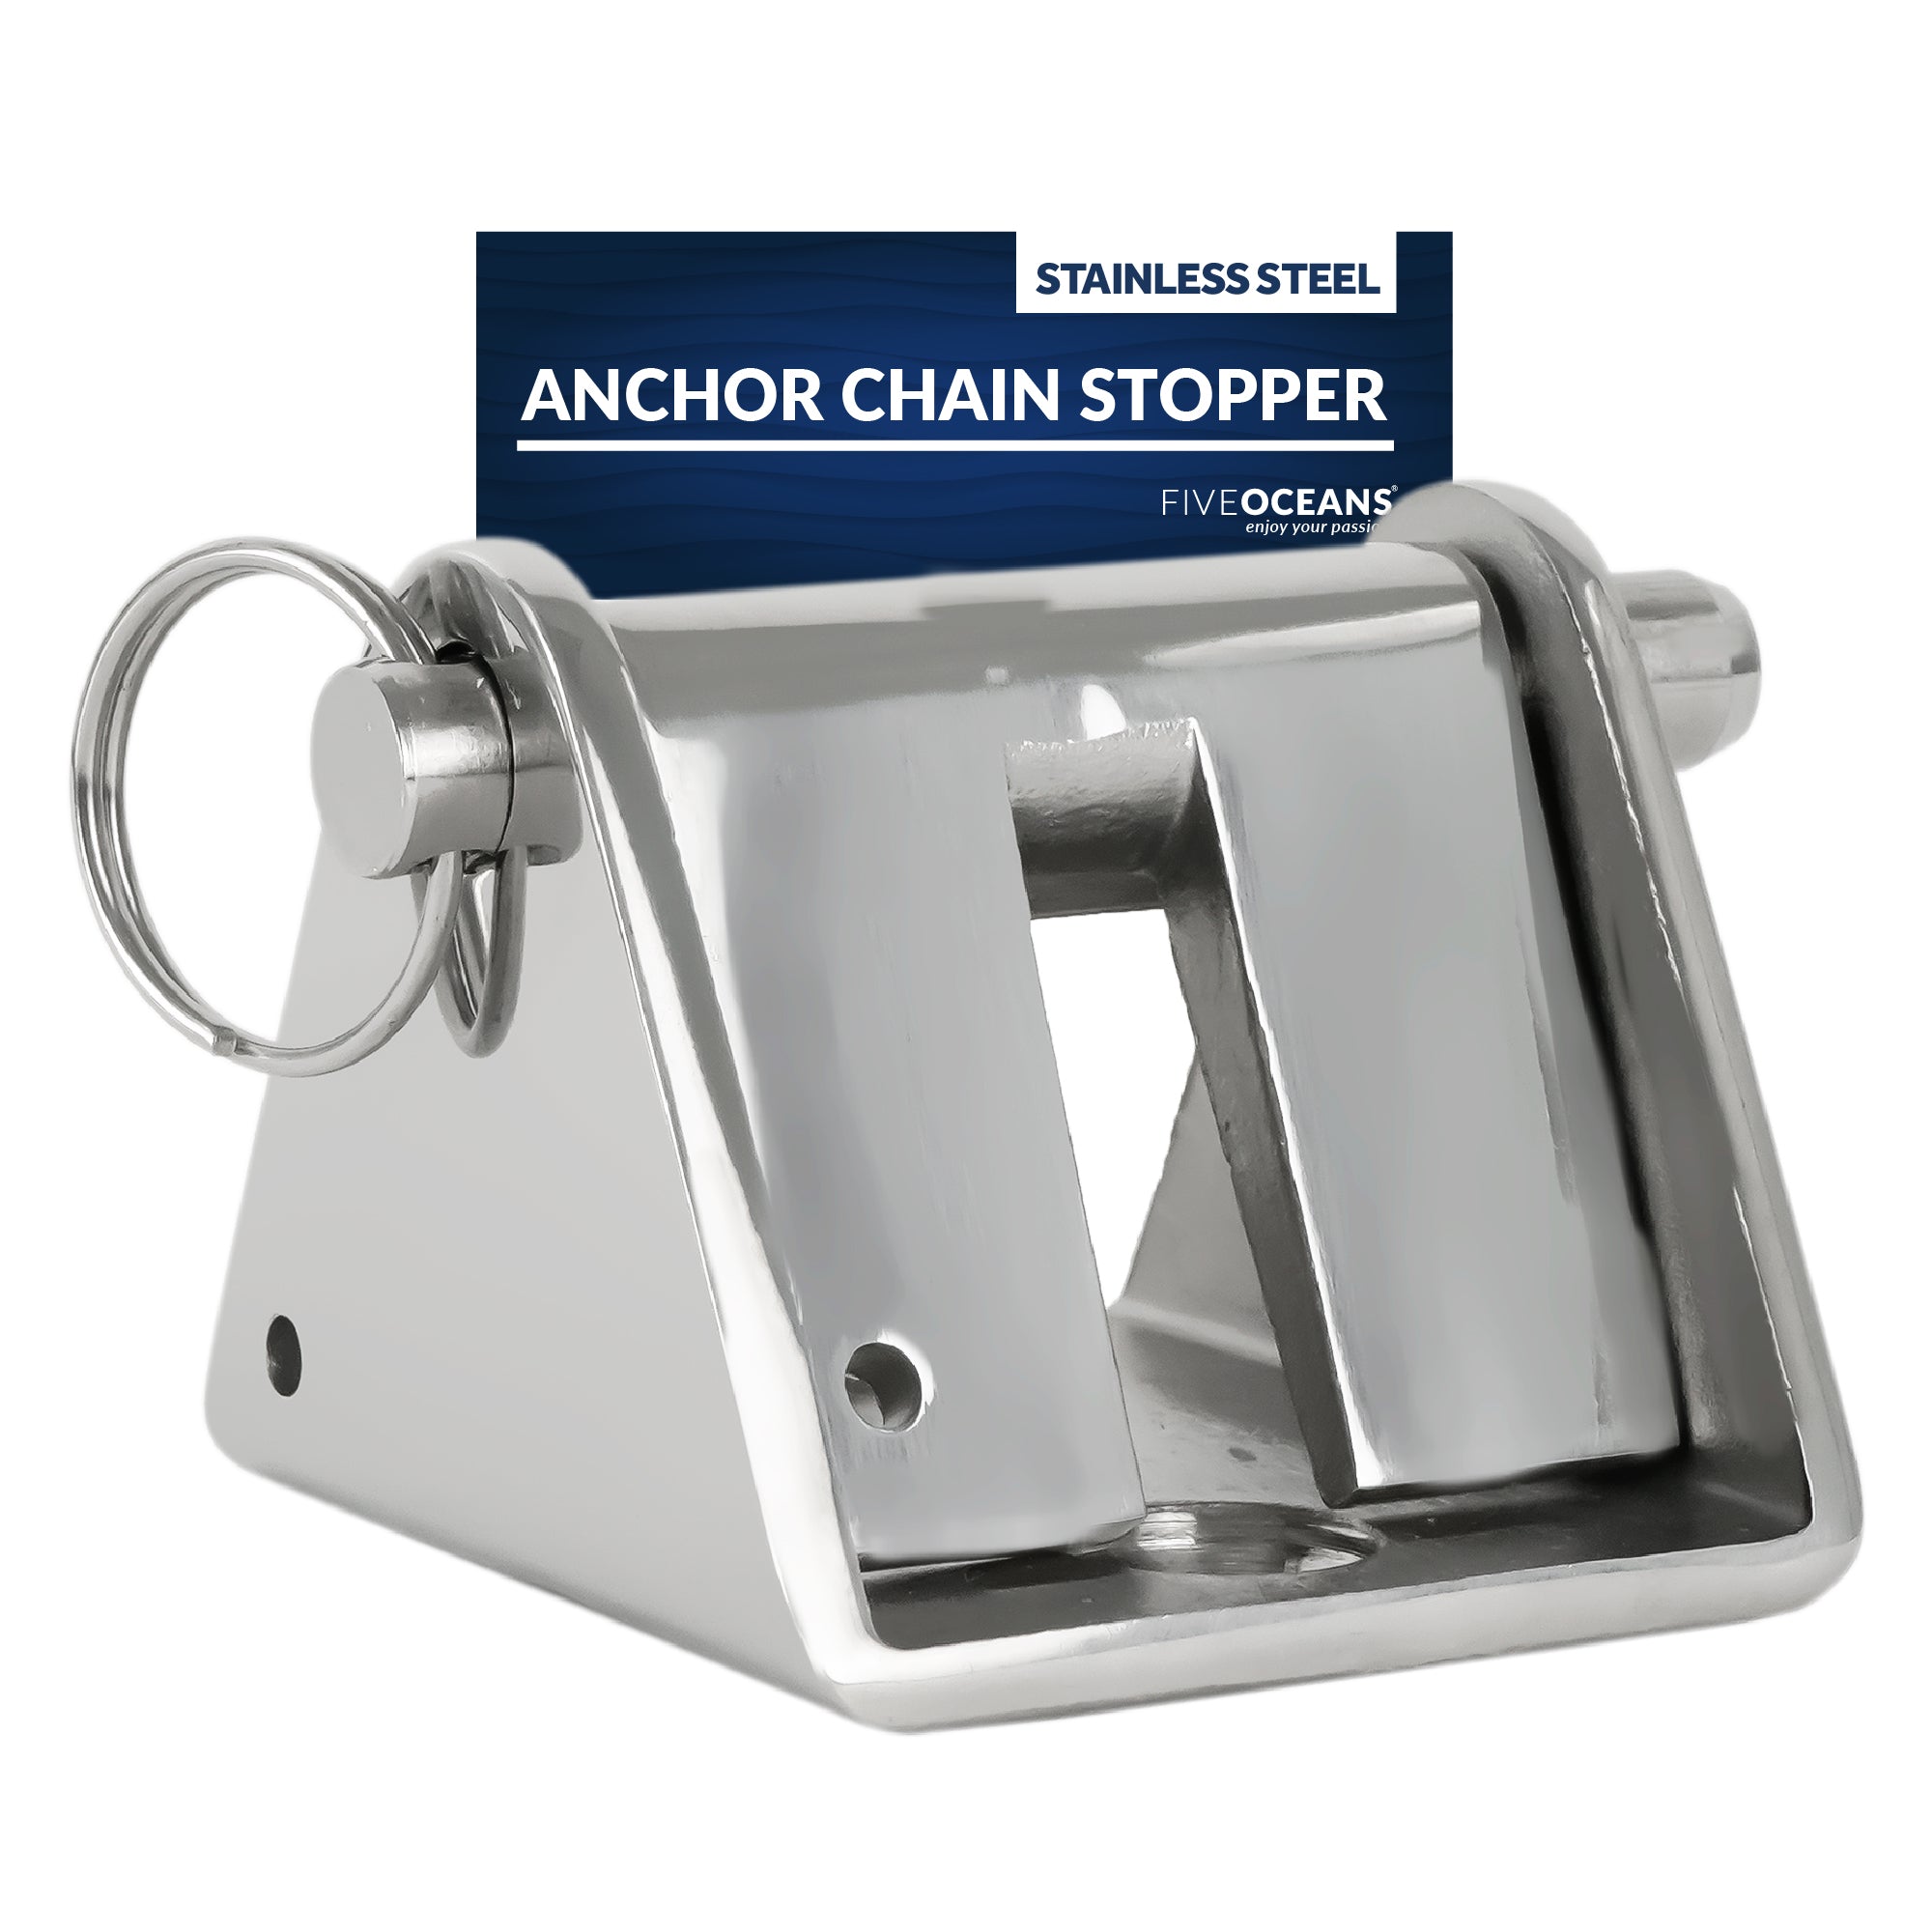 Anchor Chain Stopper for 3/16" to 1/4" Chain, Stainless Steel - FO4505